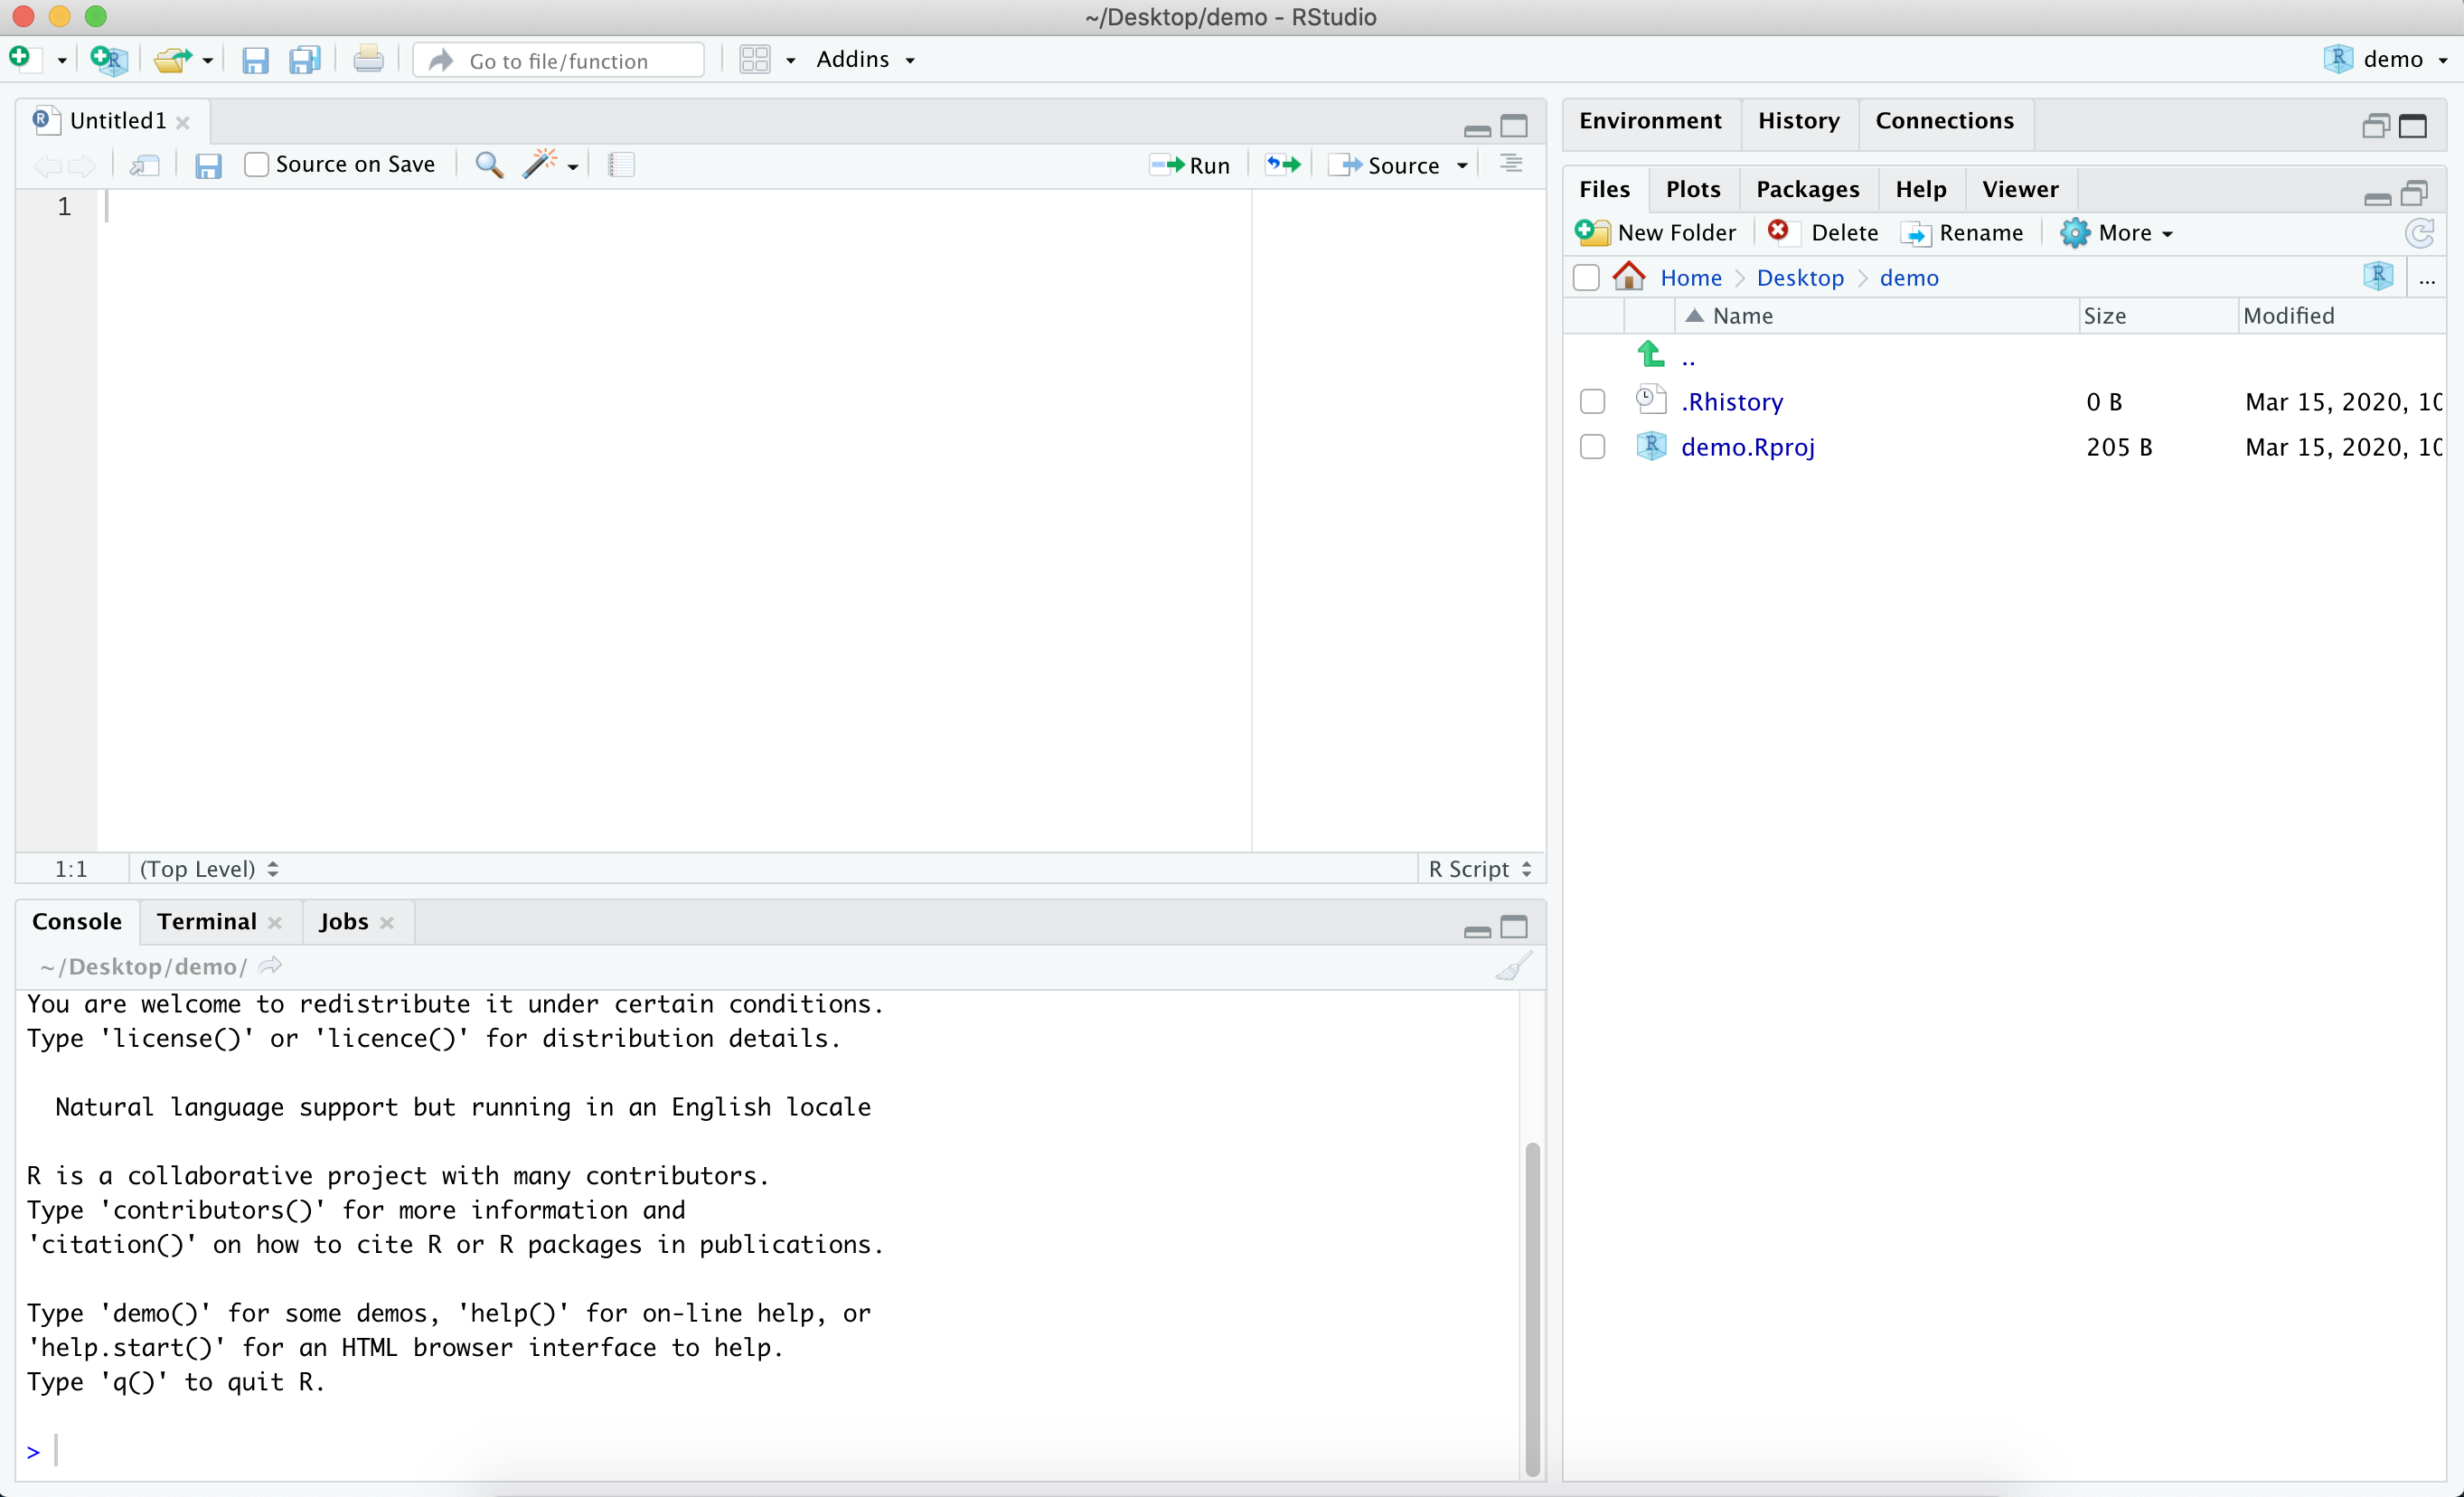 RStudio layout with a minimized Environment Pane